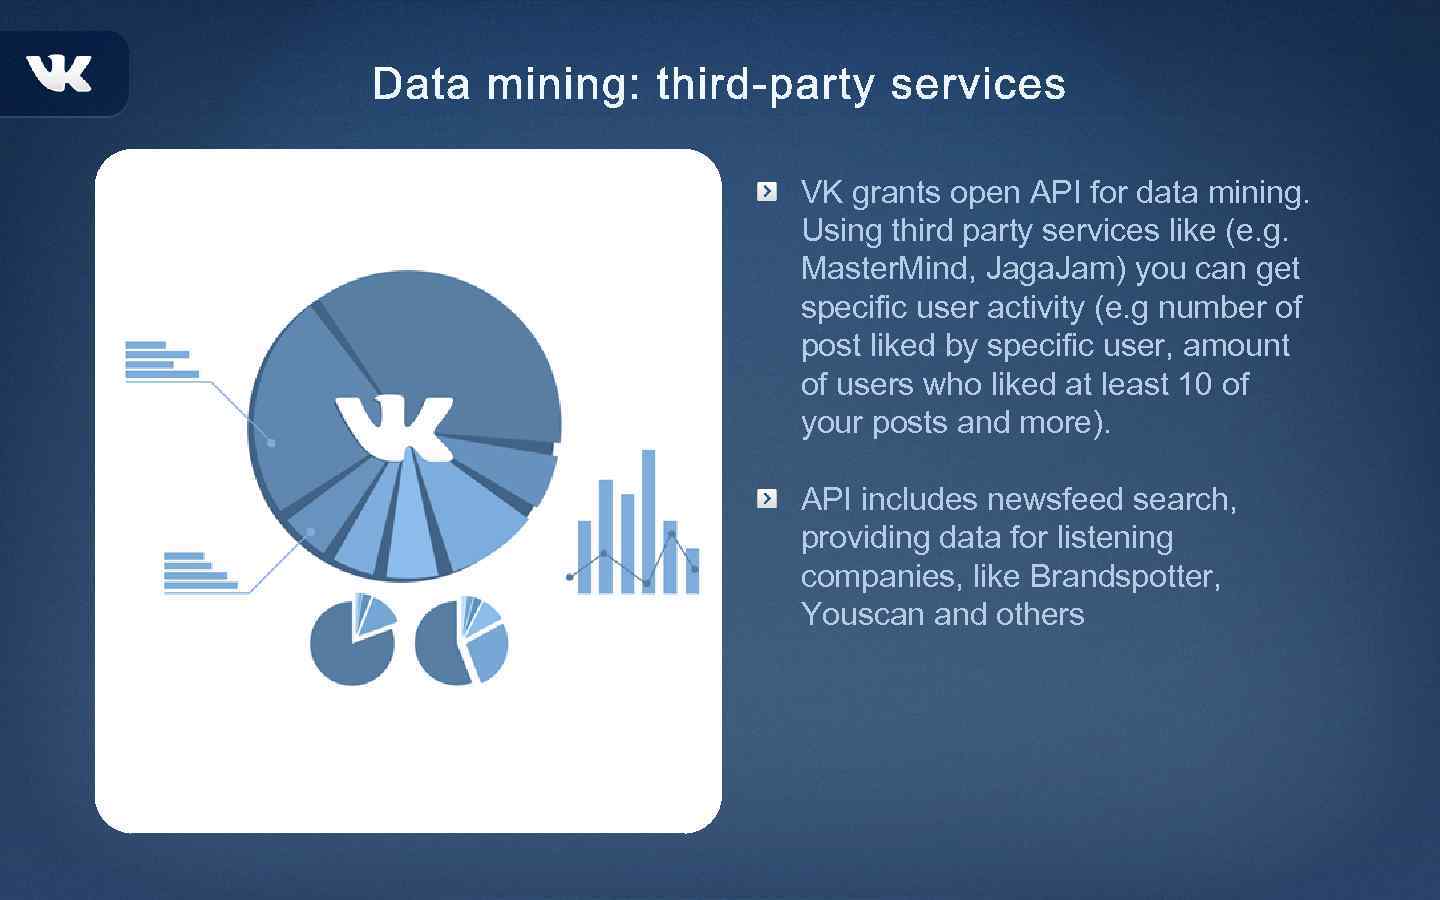 VK grants open API for data mining. Using third party services like (e. g.